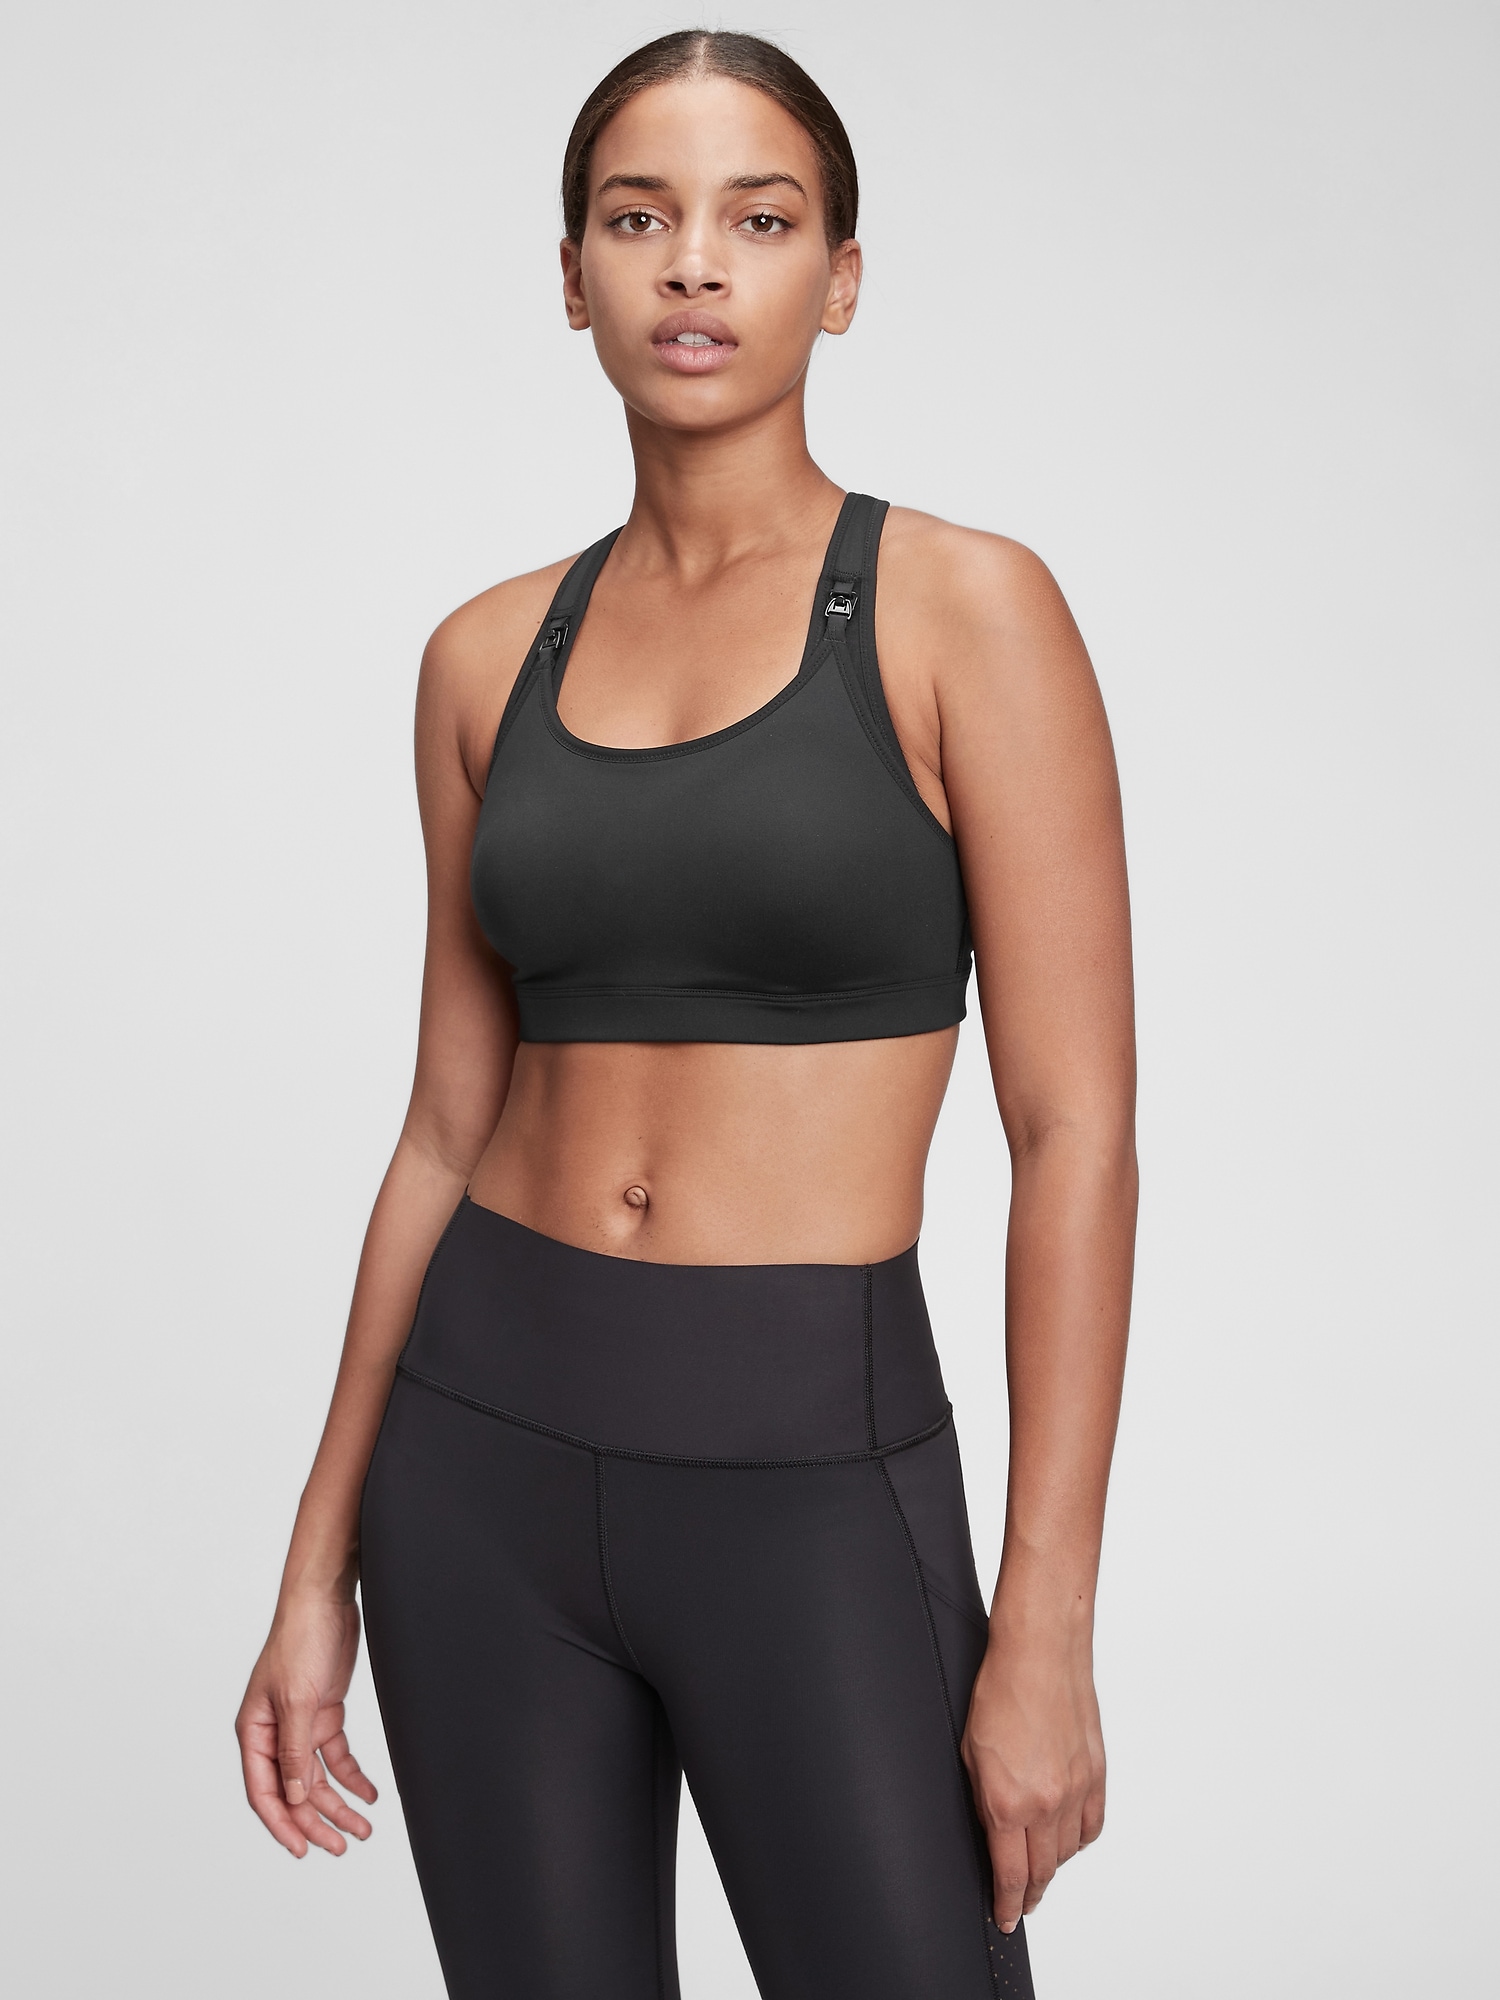 Gap Fit Eclipse Medium Support Strappy Sports Bra Blue Size XS - $29 New  With Tags - From Kare